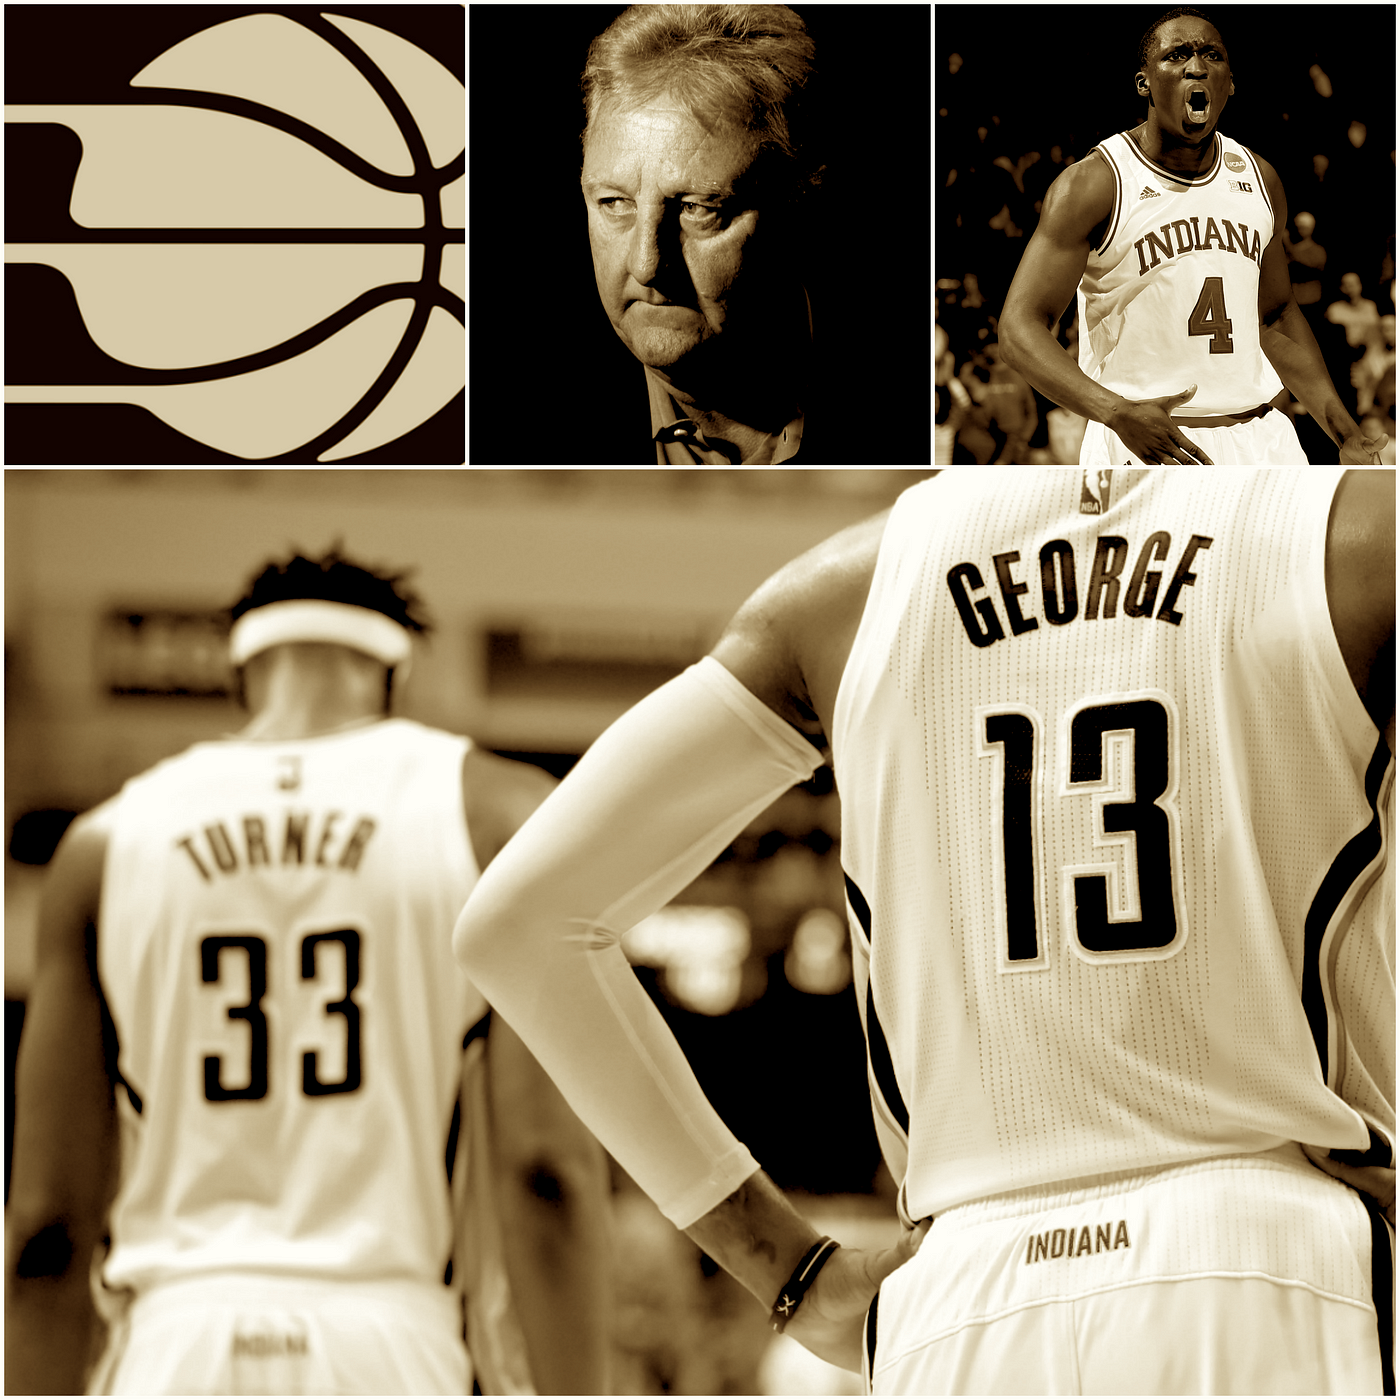 Paul George deserves better than the Pacers 